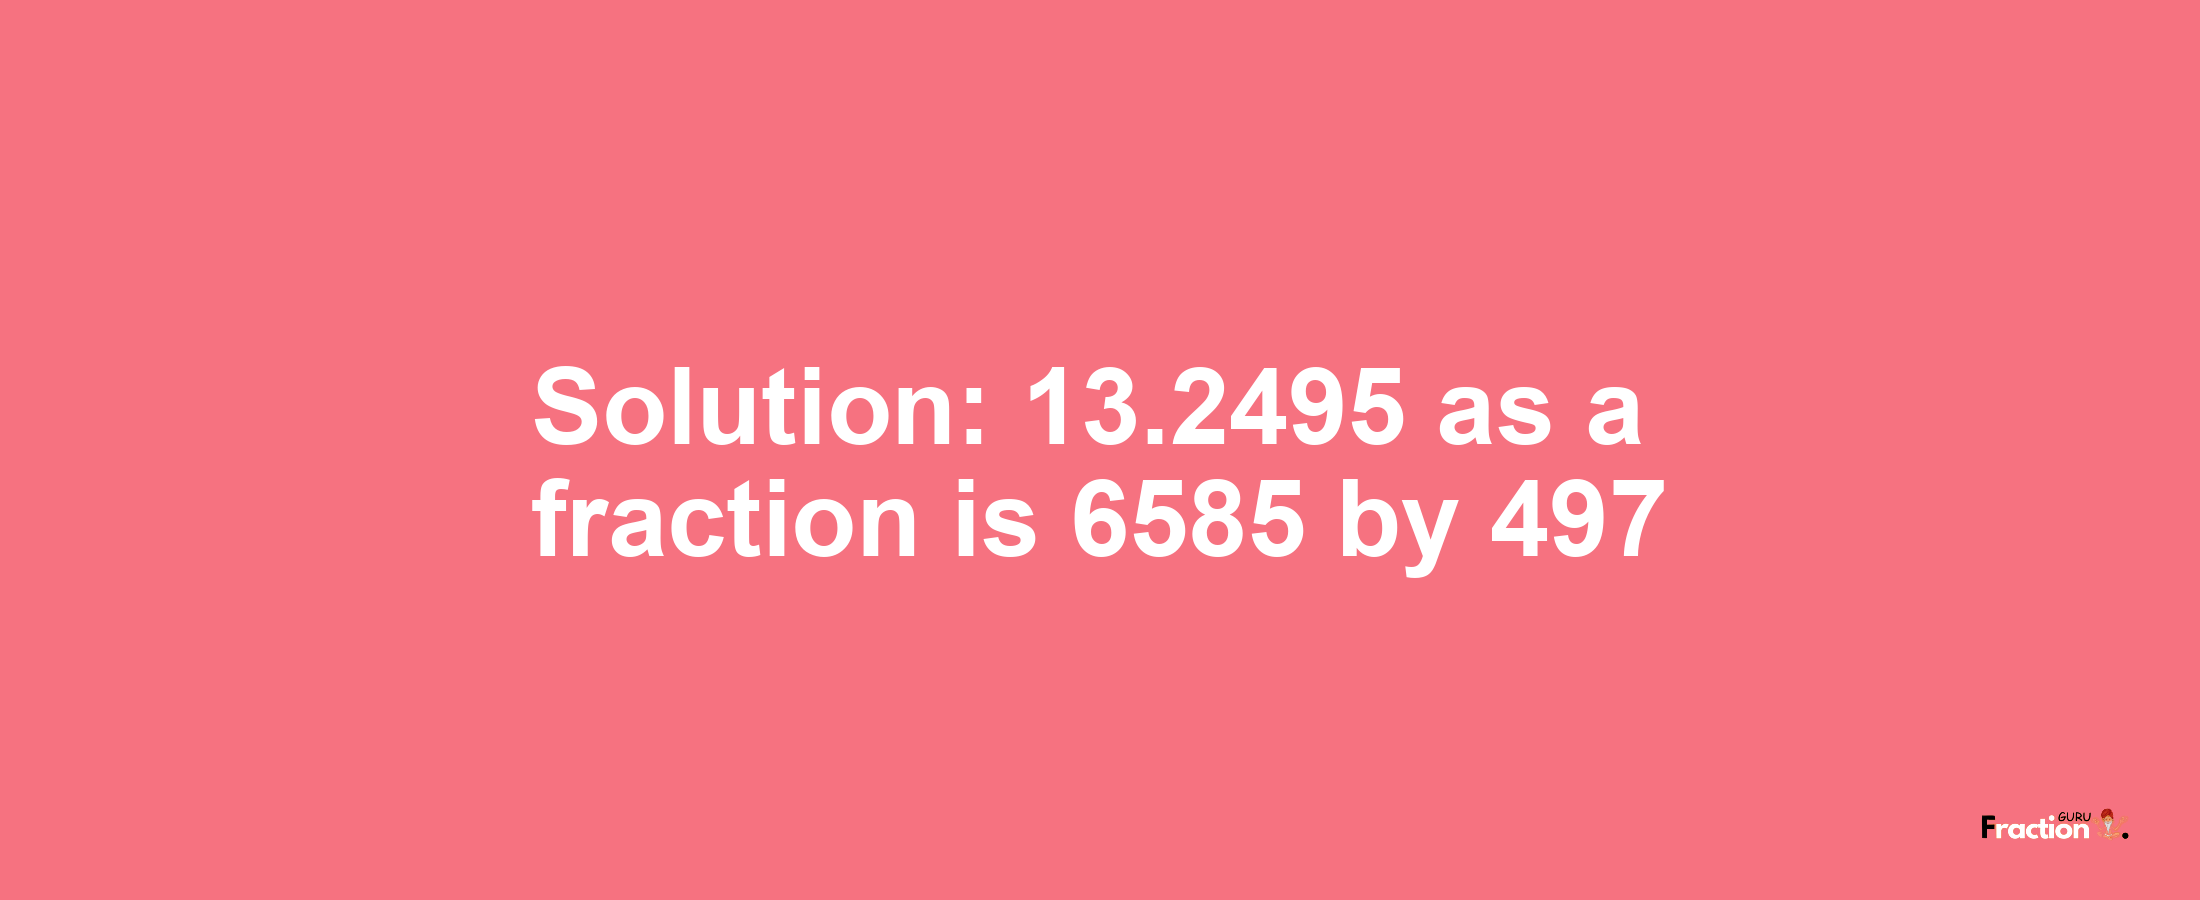 Solution:13.2495 as a fraction is 6585/497